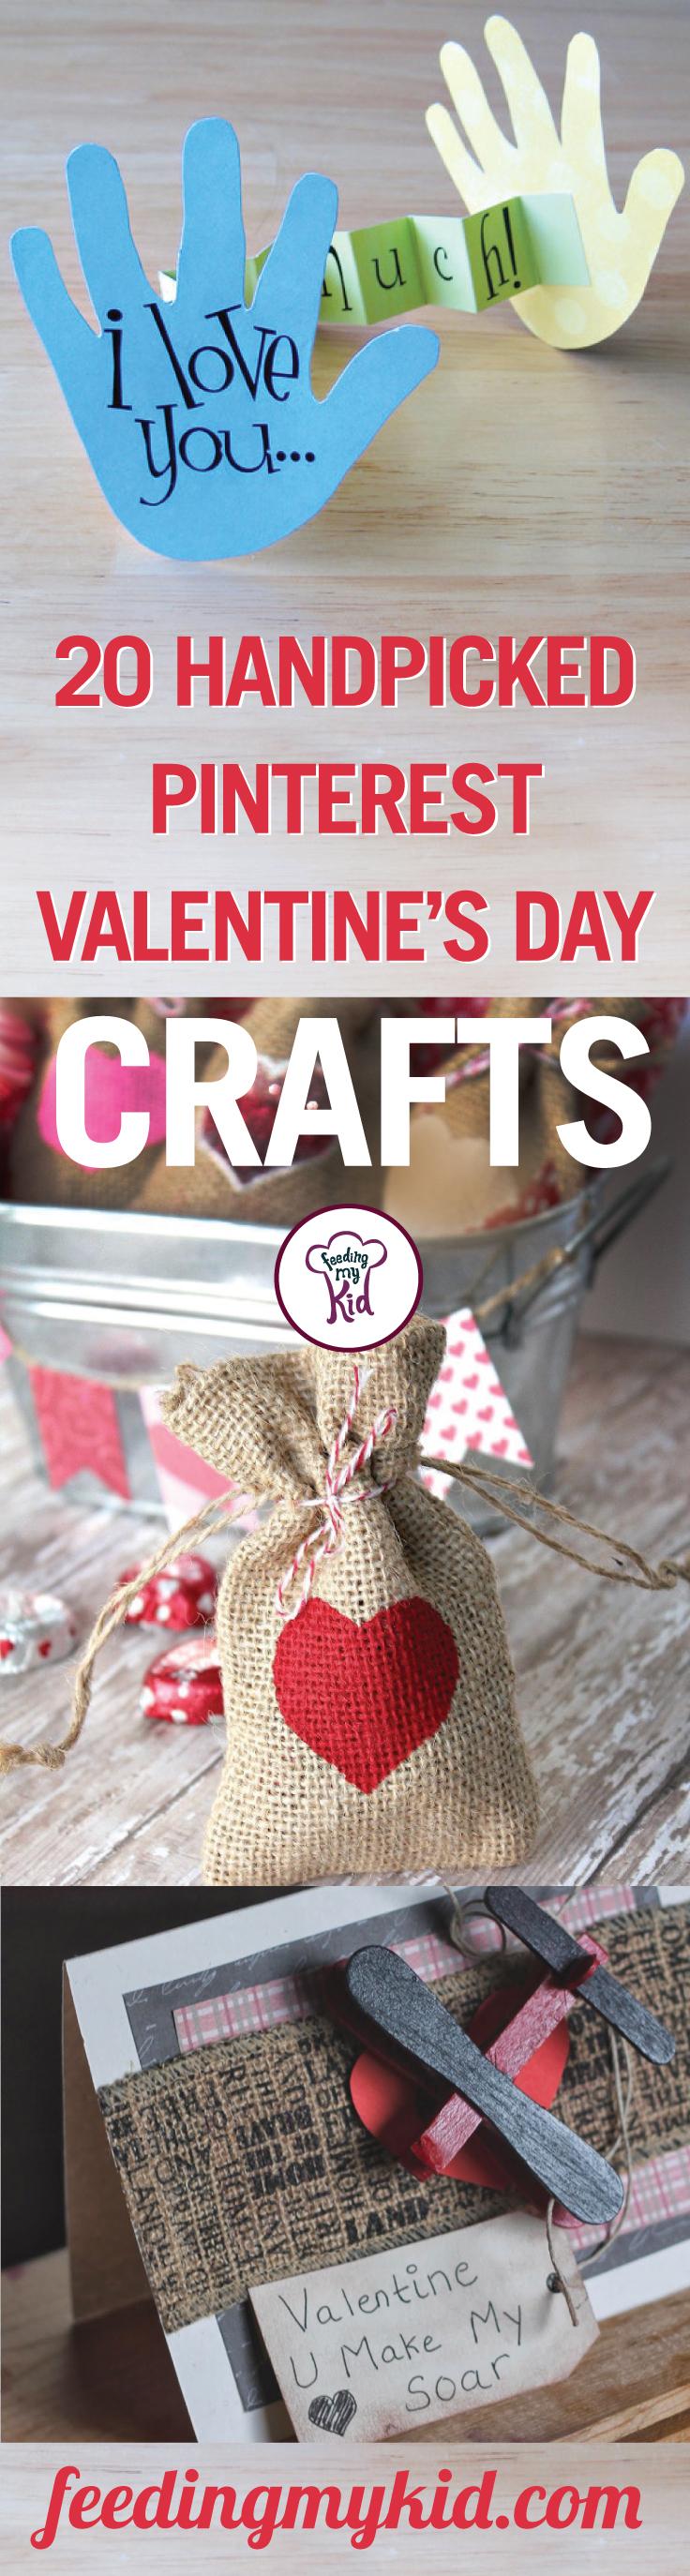 20 Handpicked Pinterest Valentine's Day Crafts - This Valentine's Day, why don't you do arts and crafts with your kids! Try these amazingly simple Valentine's Day crafts that we handpicked just for you; from valentine's day wind chimes to a little minion. These crafts are perfect to make with your kids!